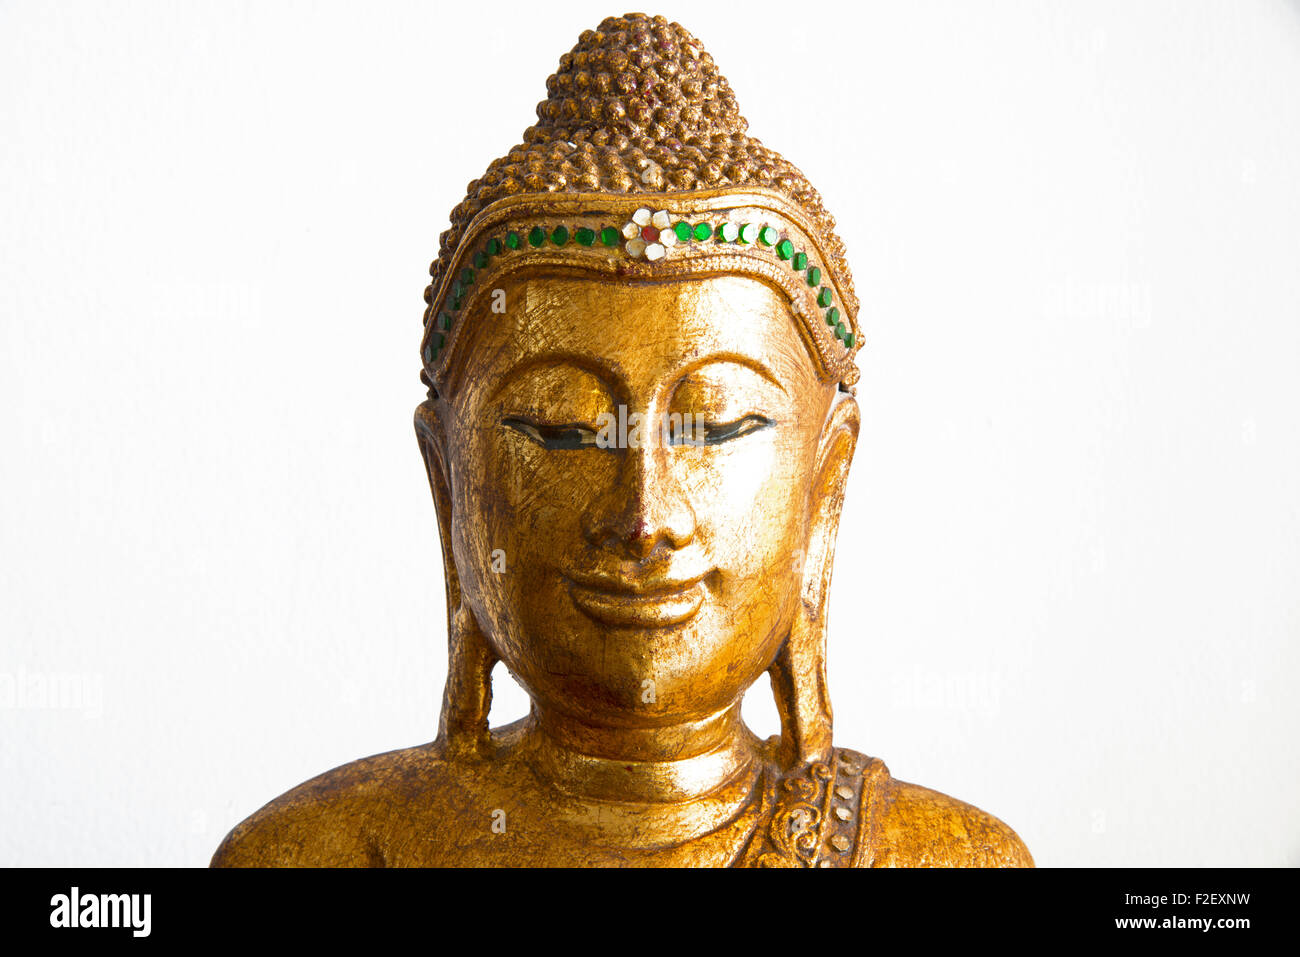 Decorative sculpture of Buddha head in gold color Stock Photo